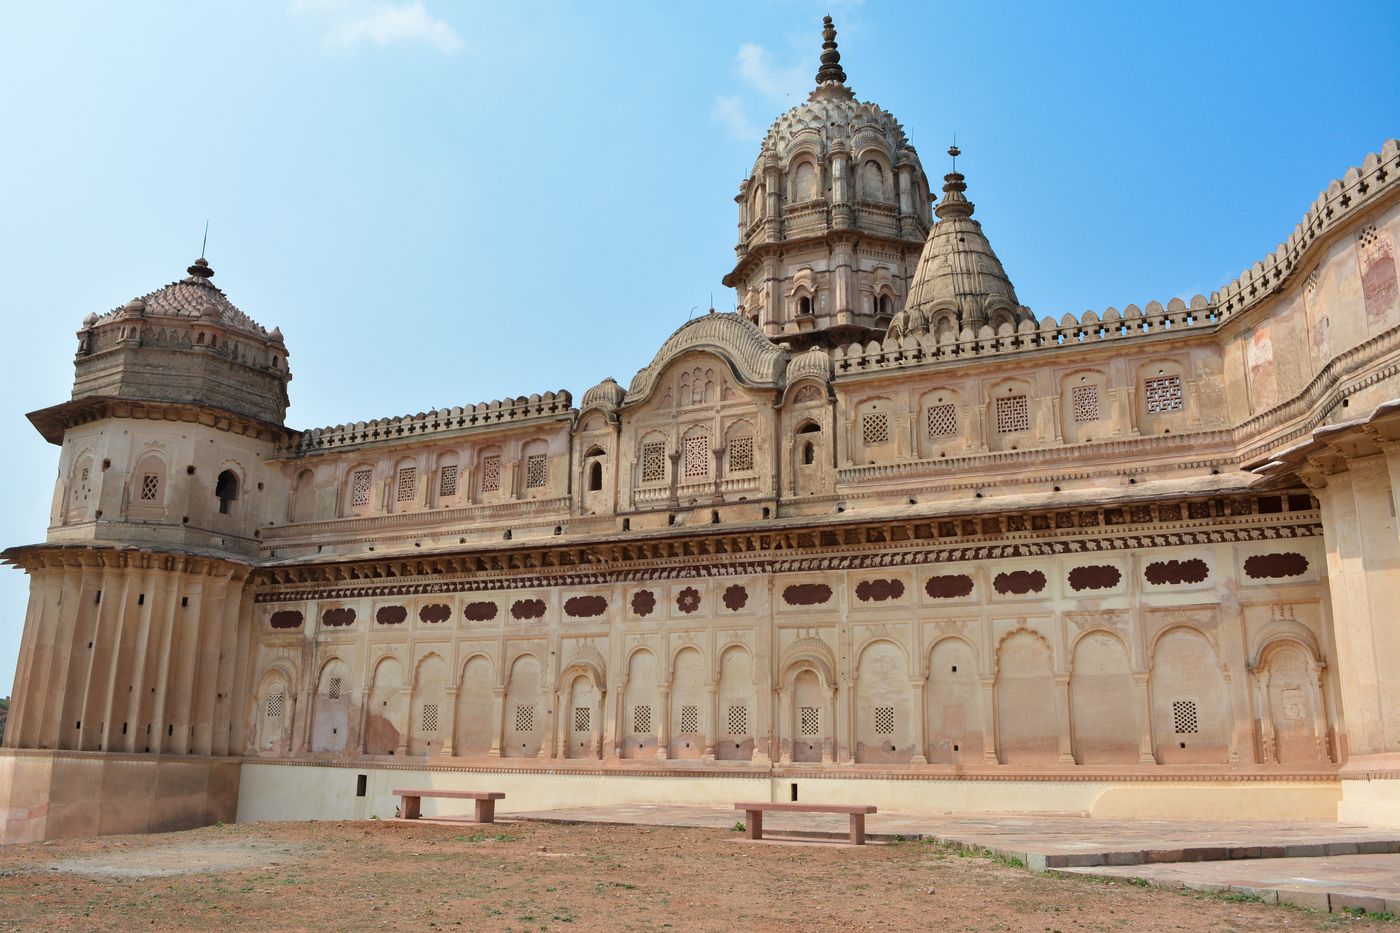 A panoramic view of the exquisite architecture of Lakshmi Narayan temple in Orchha, lined with jharokhas and pillars 